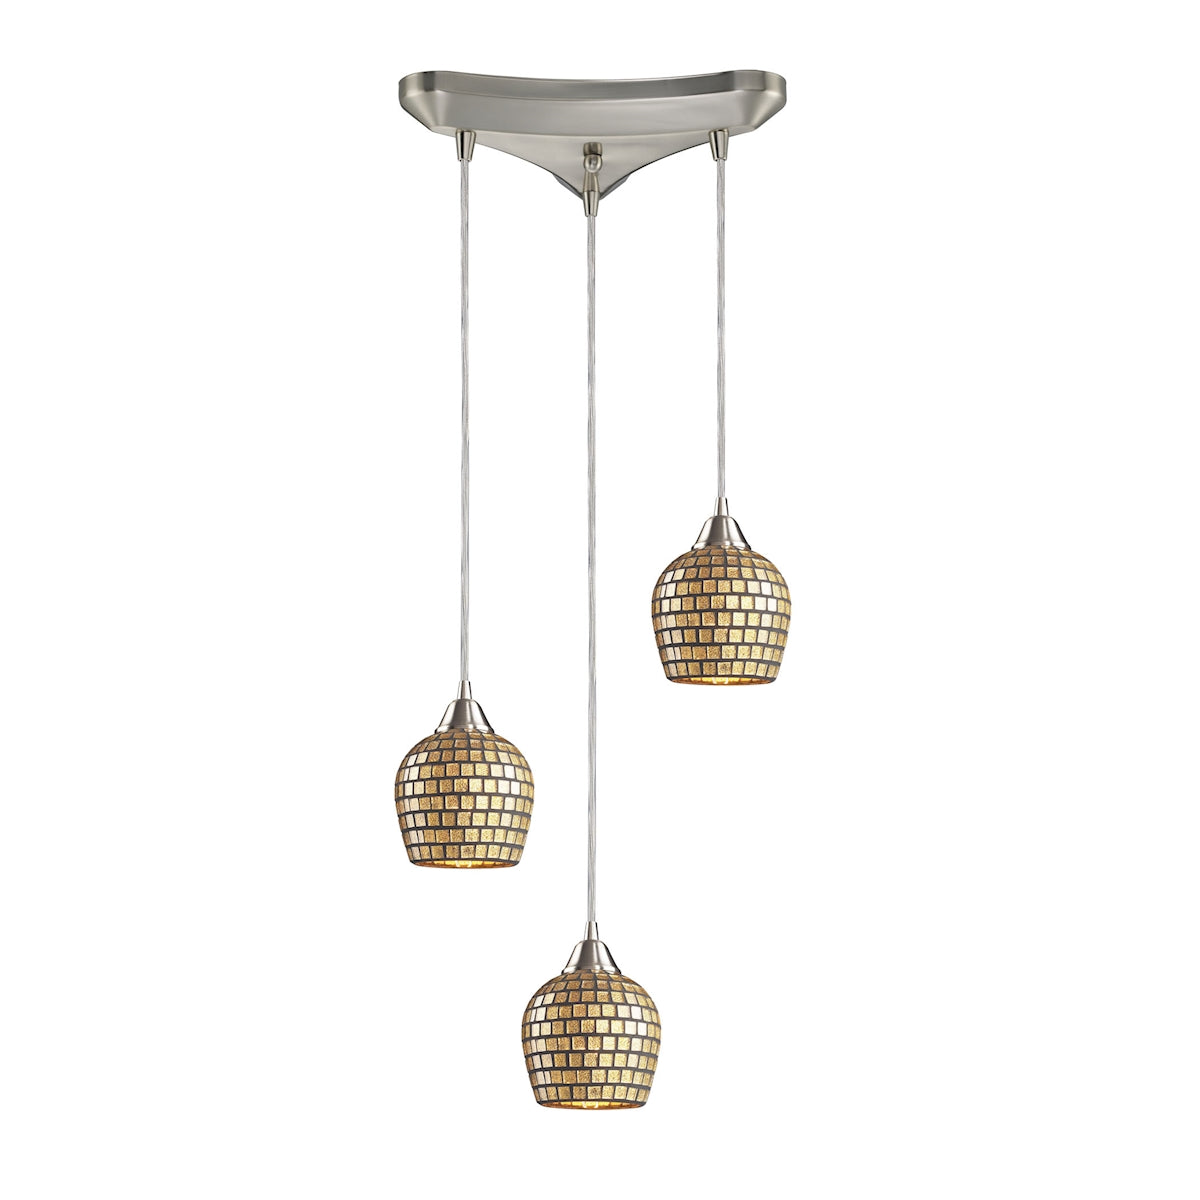 Fusion 3-Light Triangular Pendant Fixture in Satin Nickel with Gold Leaf Mosaic Glass